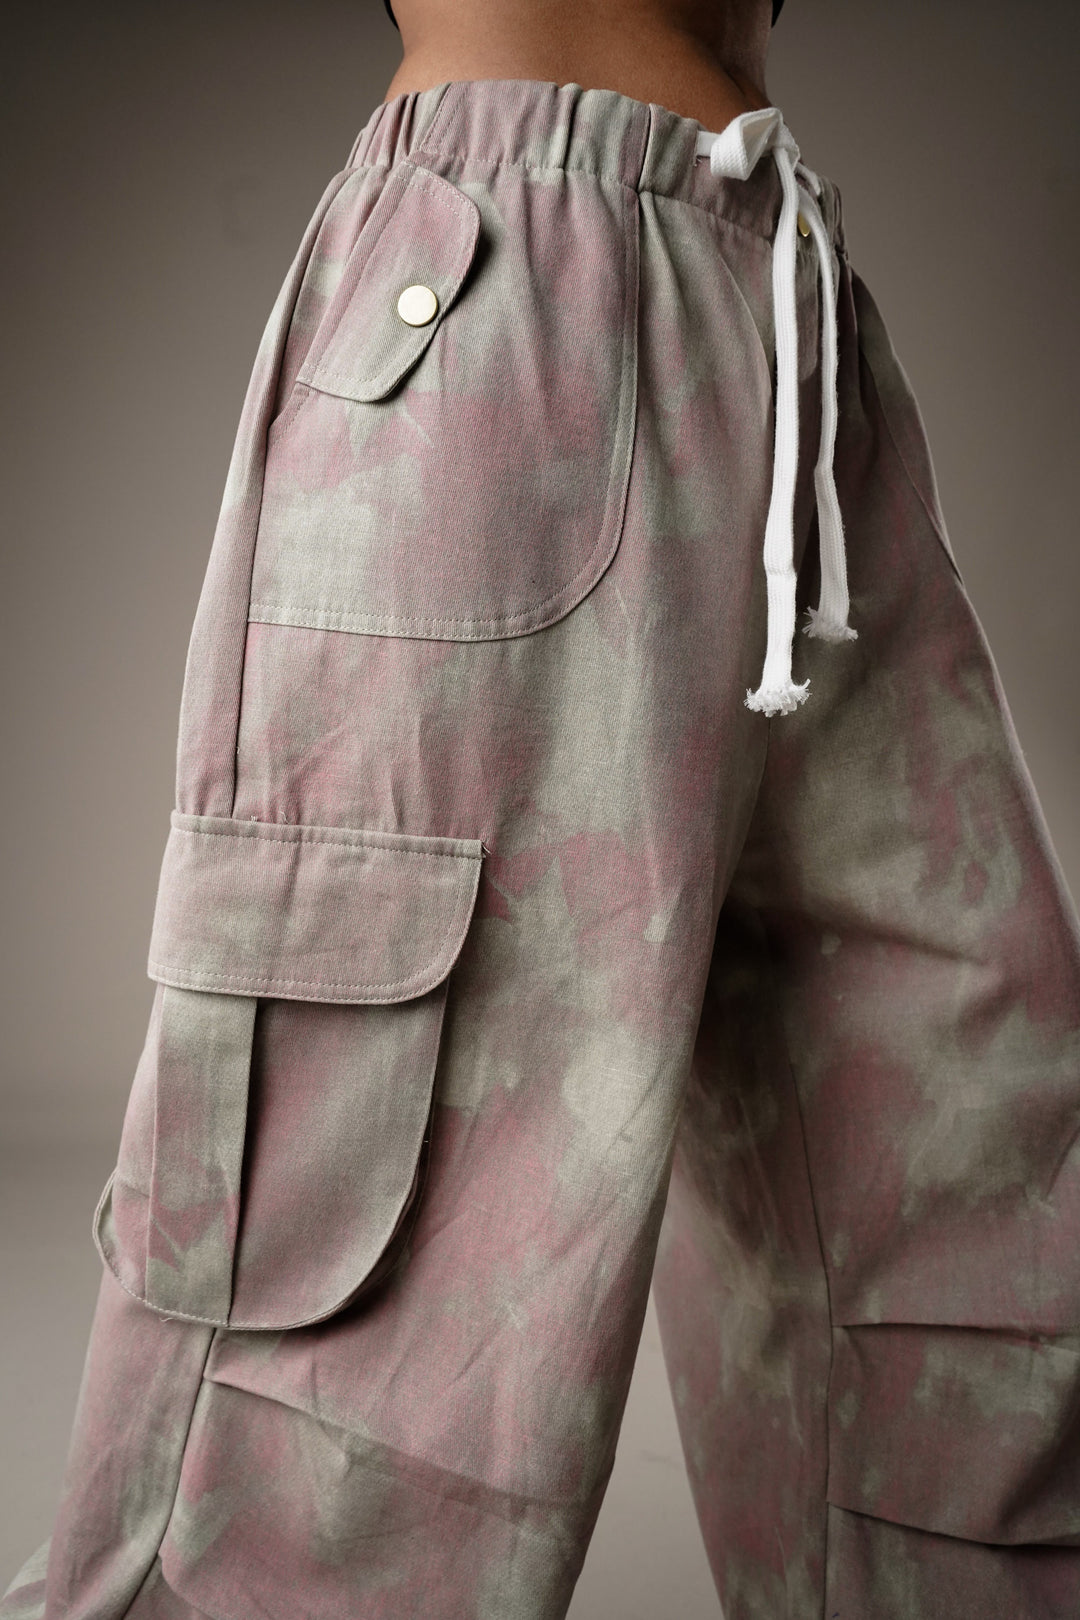 Pink and grey streetwear cargo pants